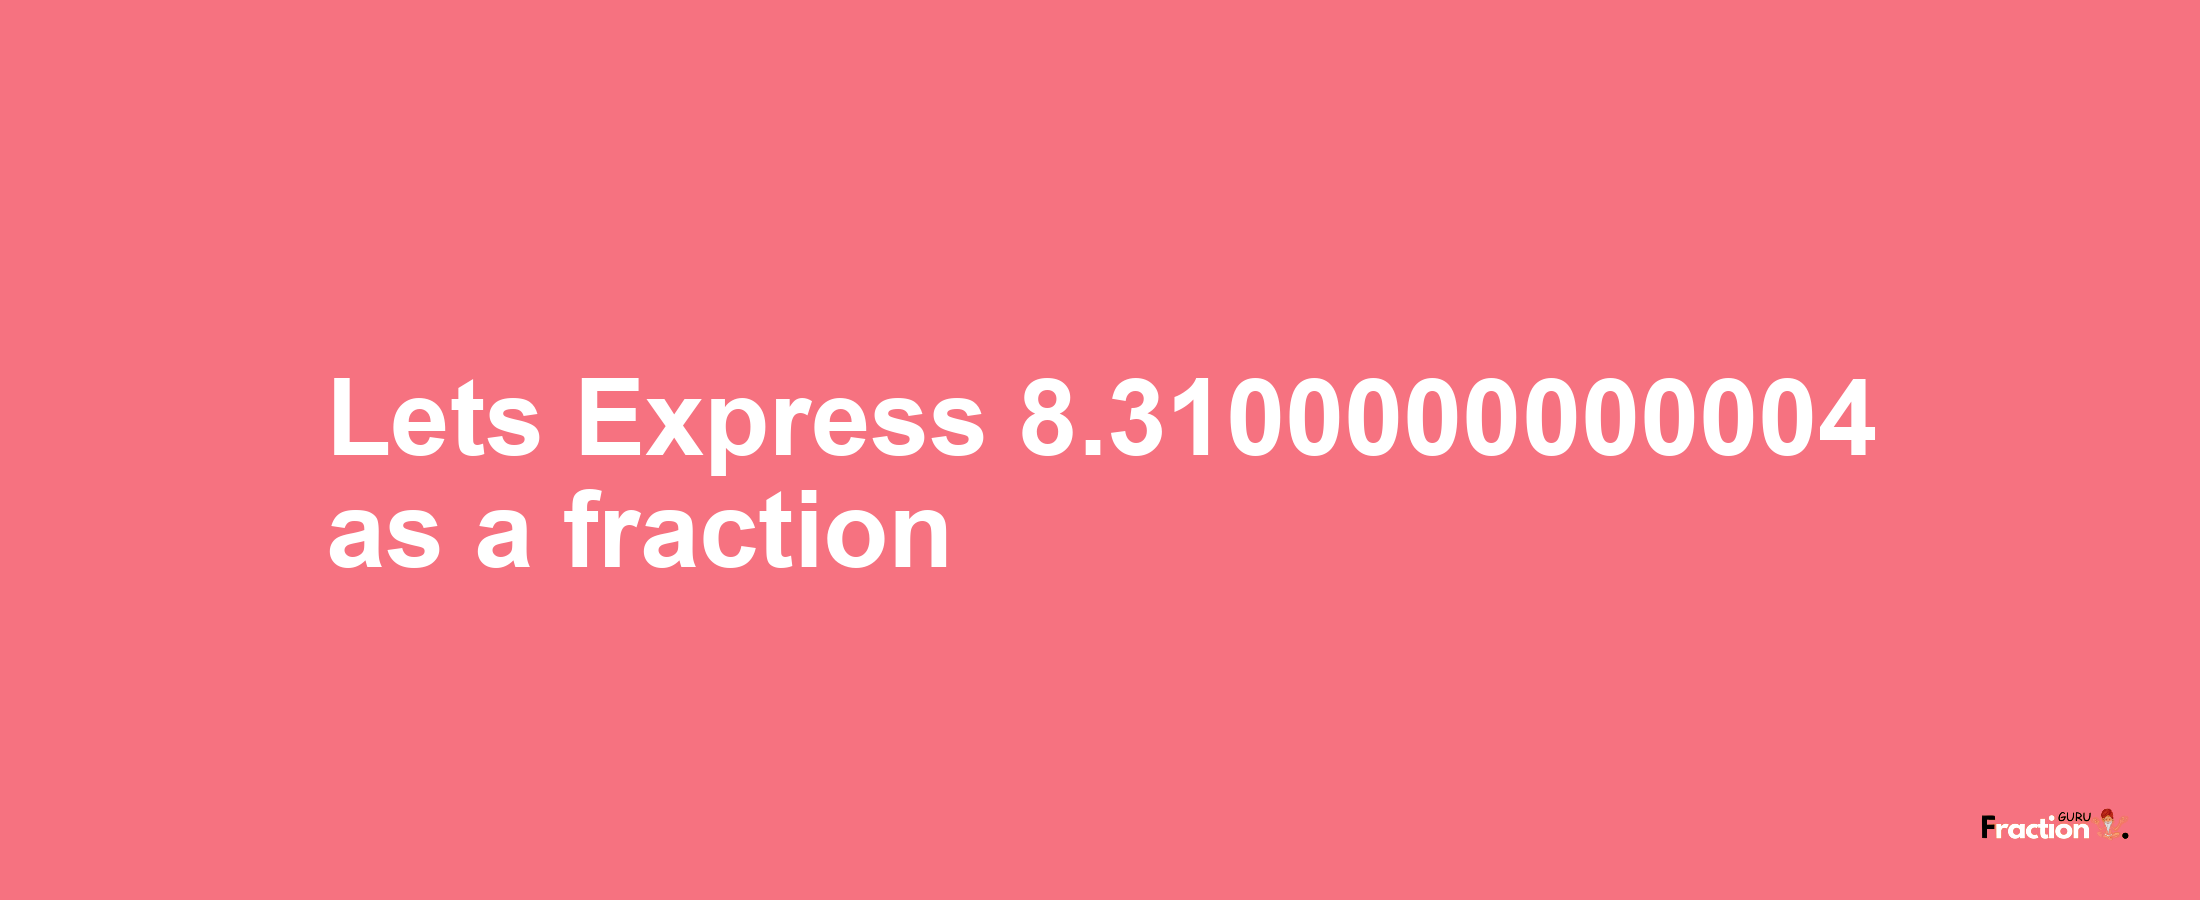 Lets Express 8.3100000000004 as afraction